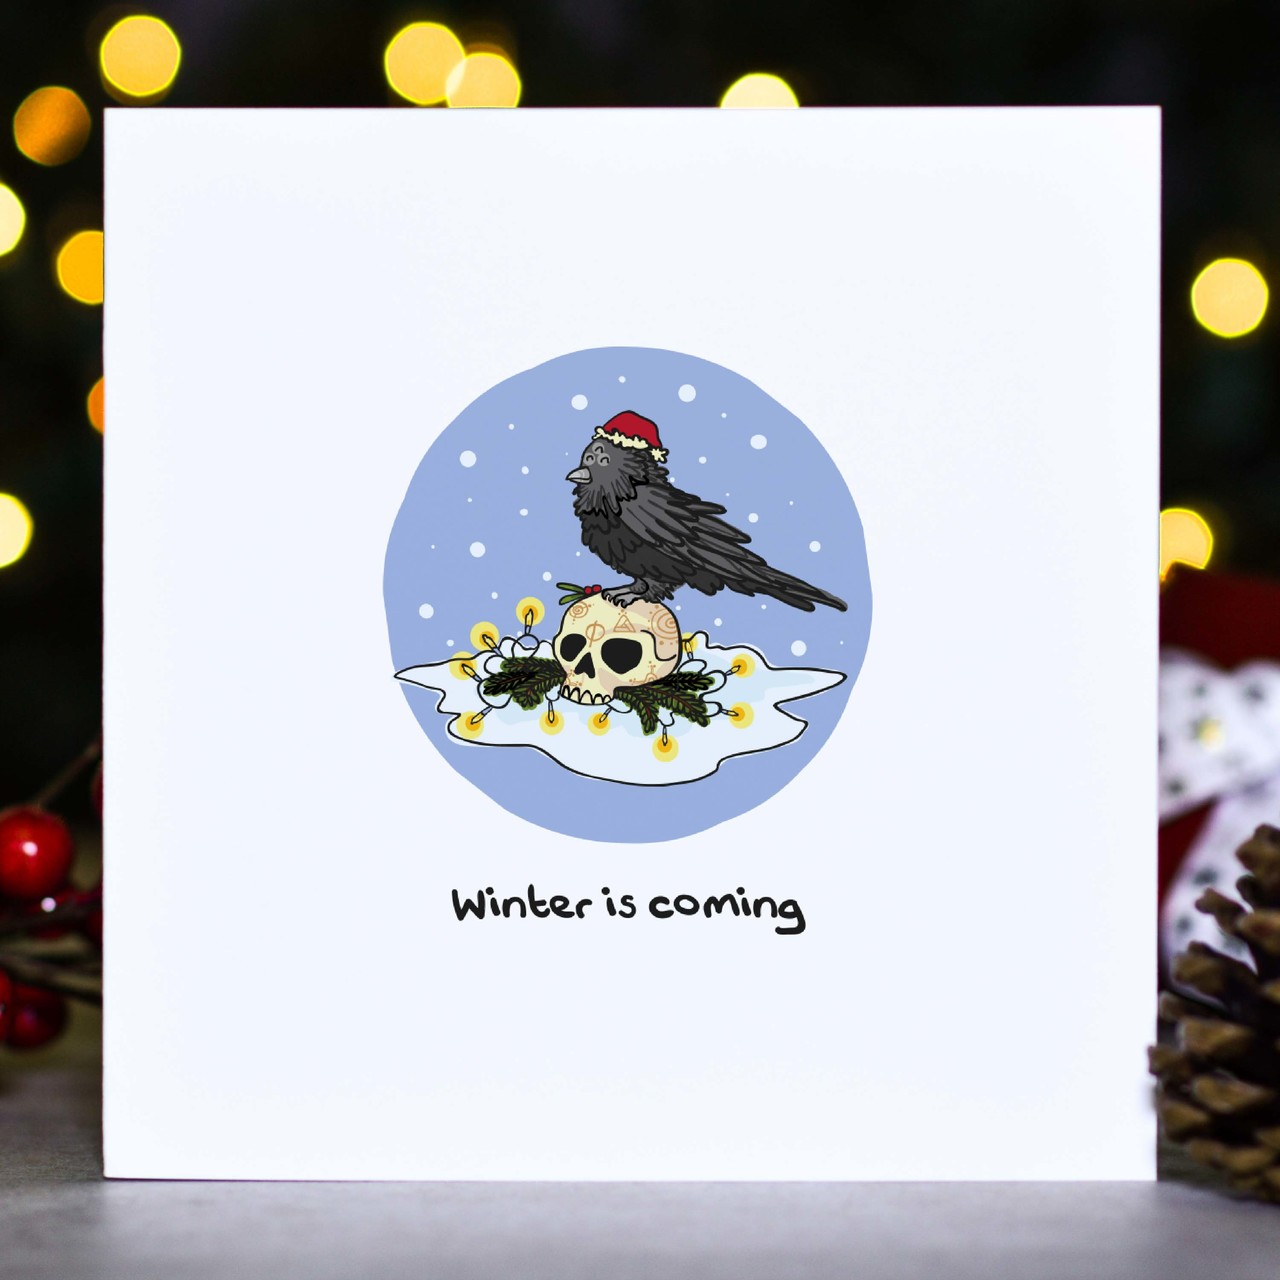 Winter is coming – Raven GOT Christmas Card